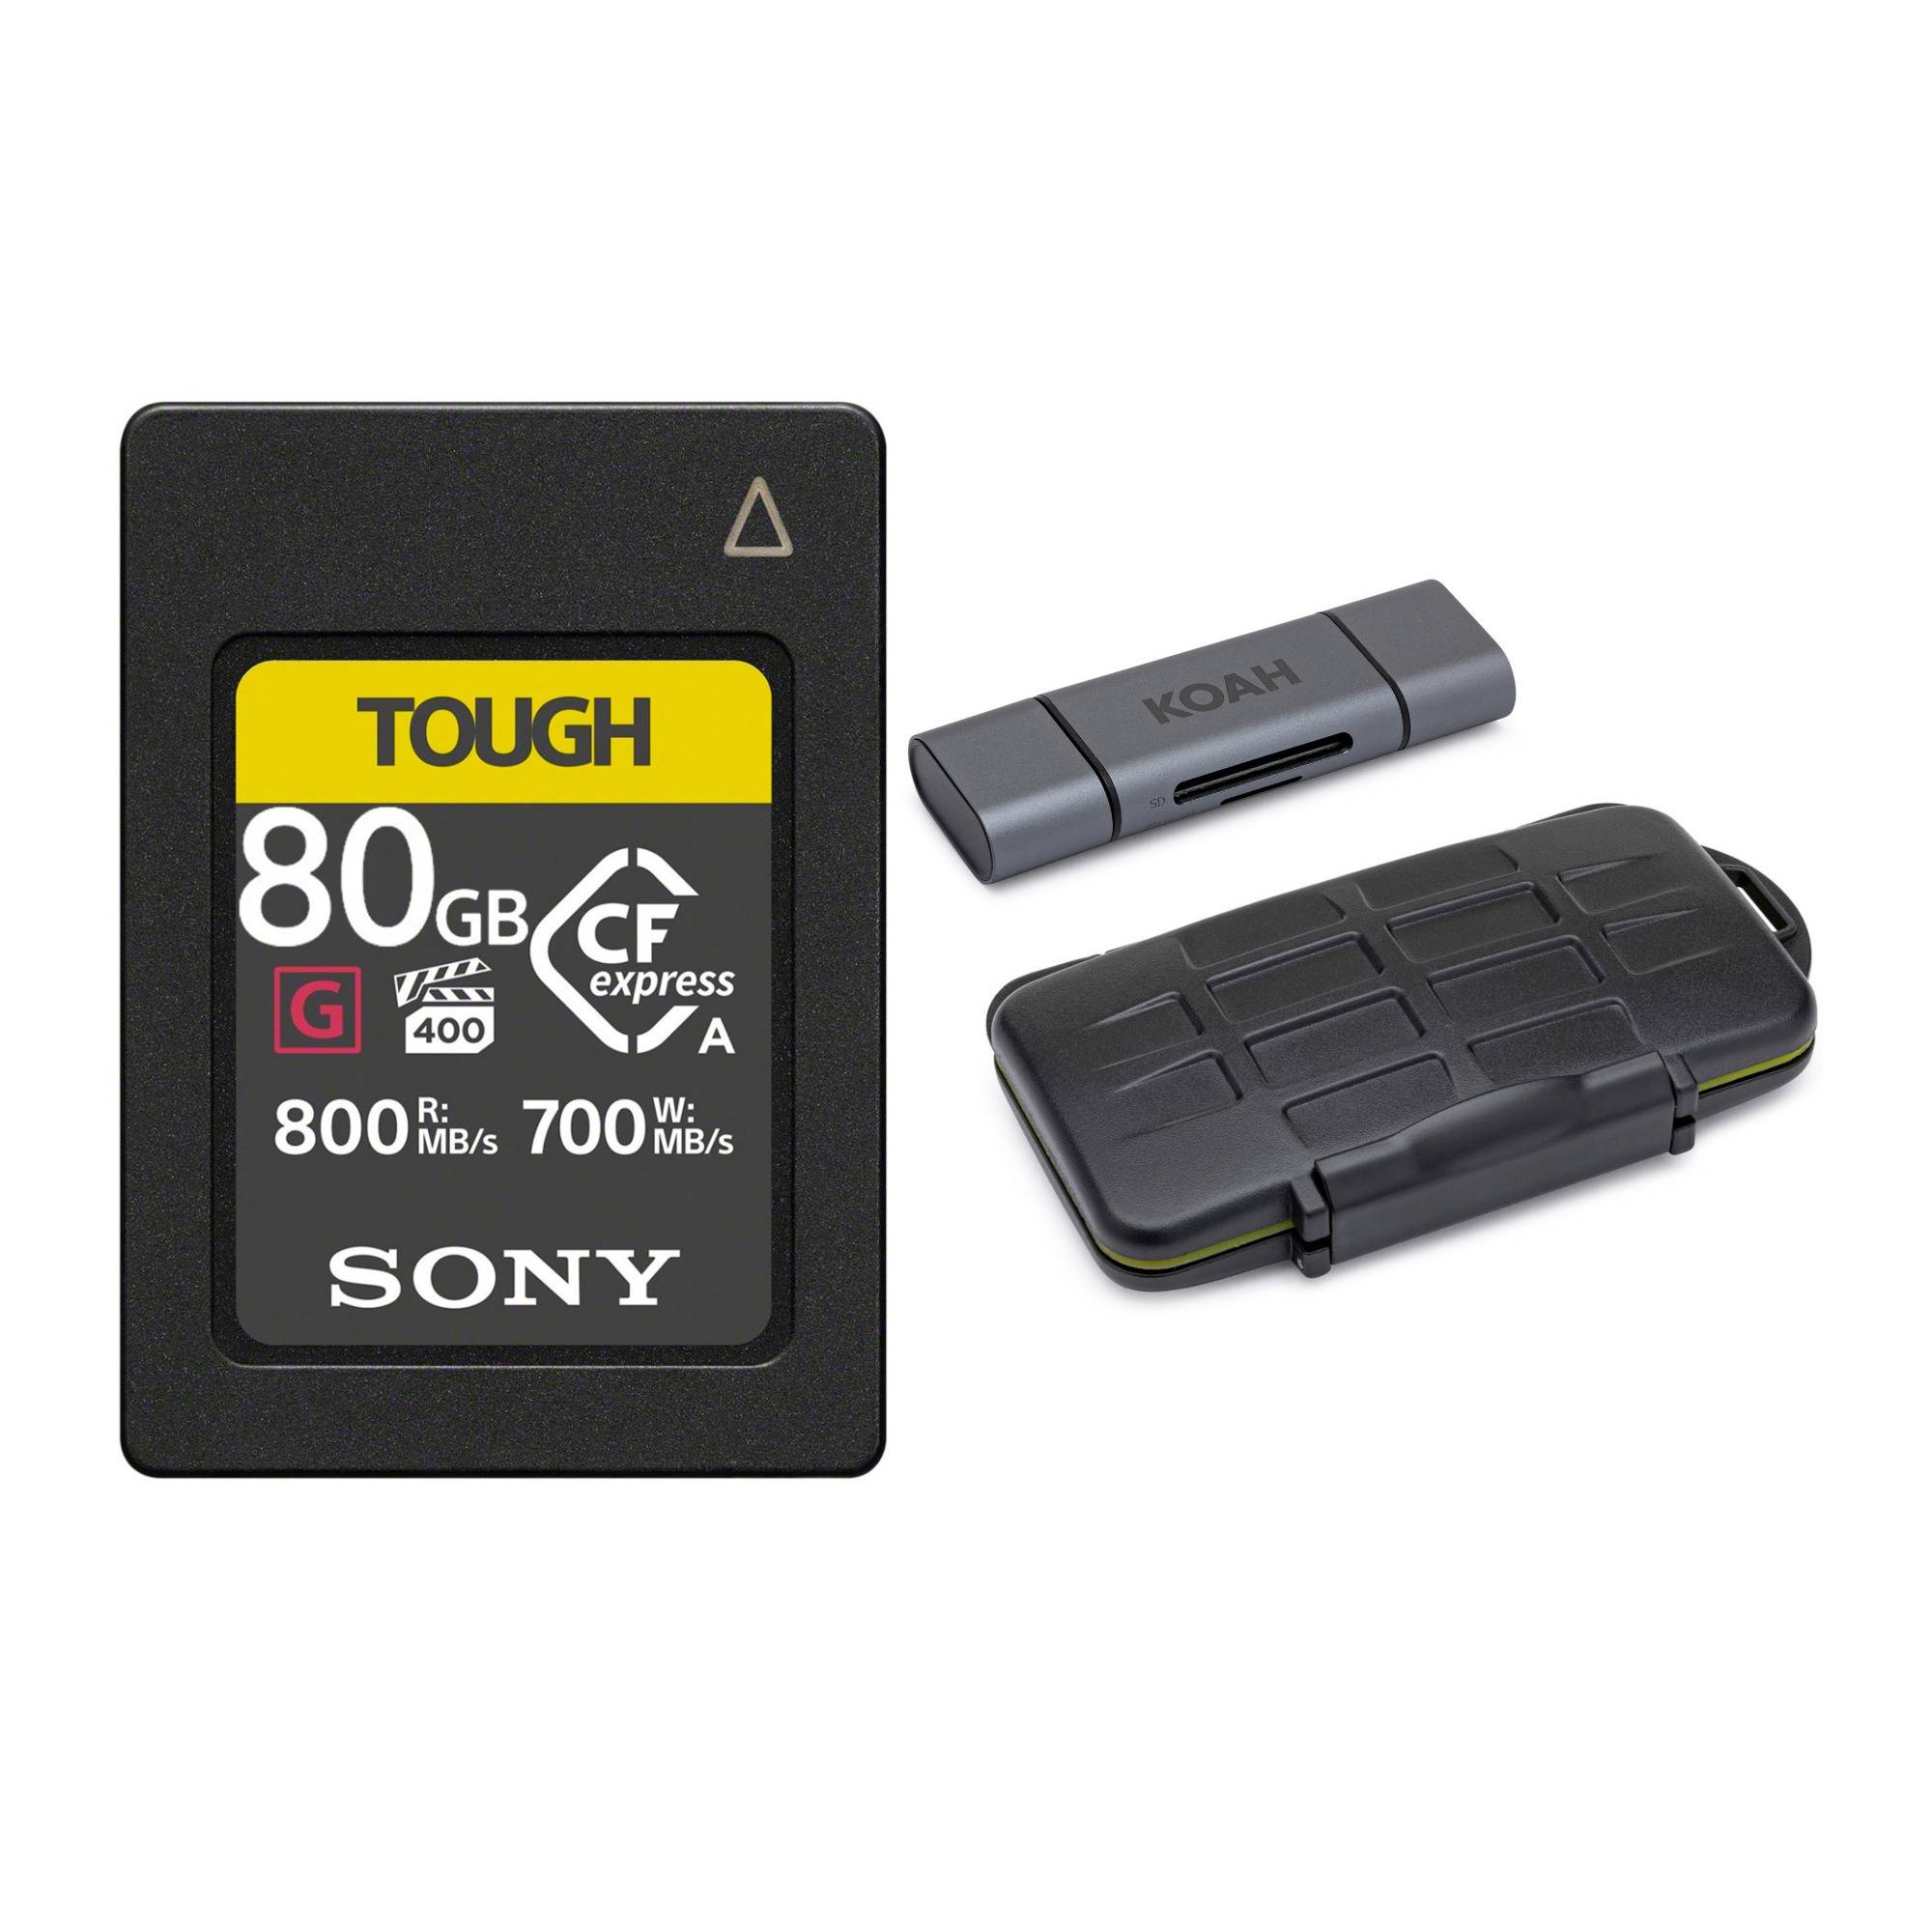 Sony CFexpress Type A 80GB Memory Card and Rugged Storage Carrying Case